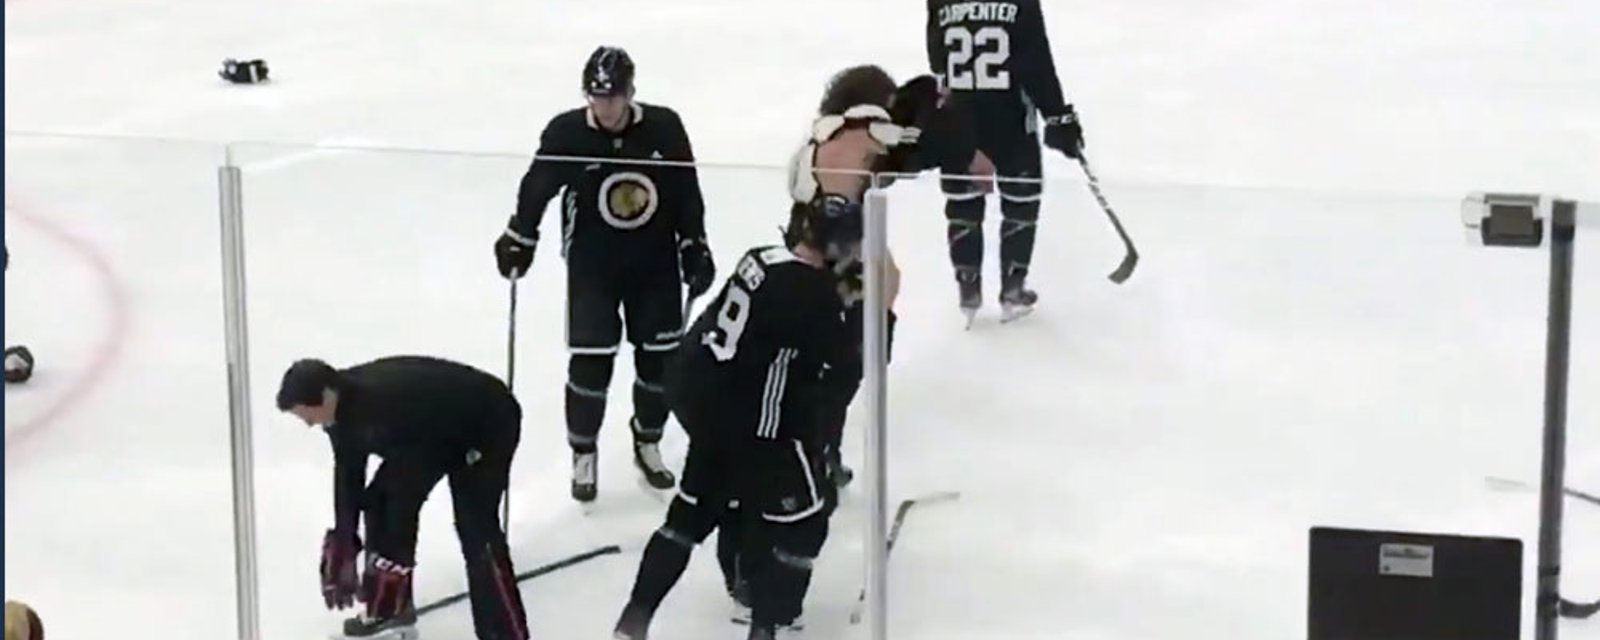 Toews and Keith drop the gloves and go at it in practice!